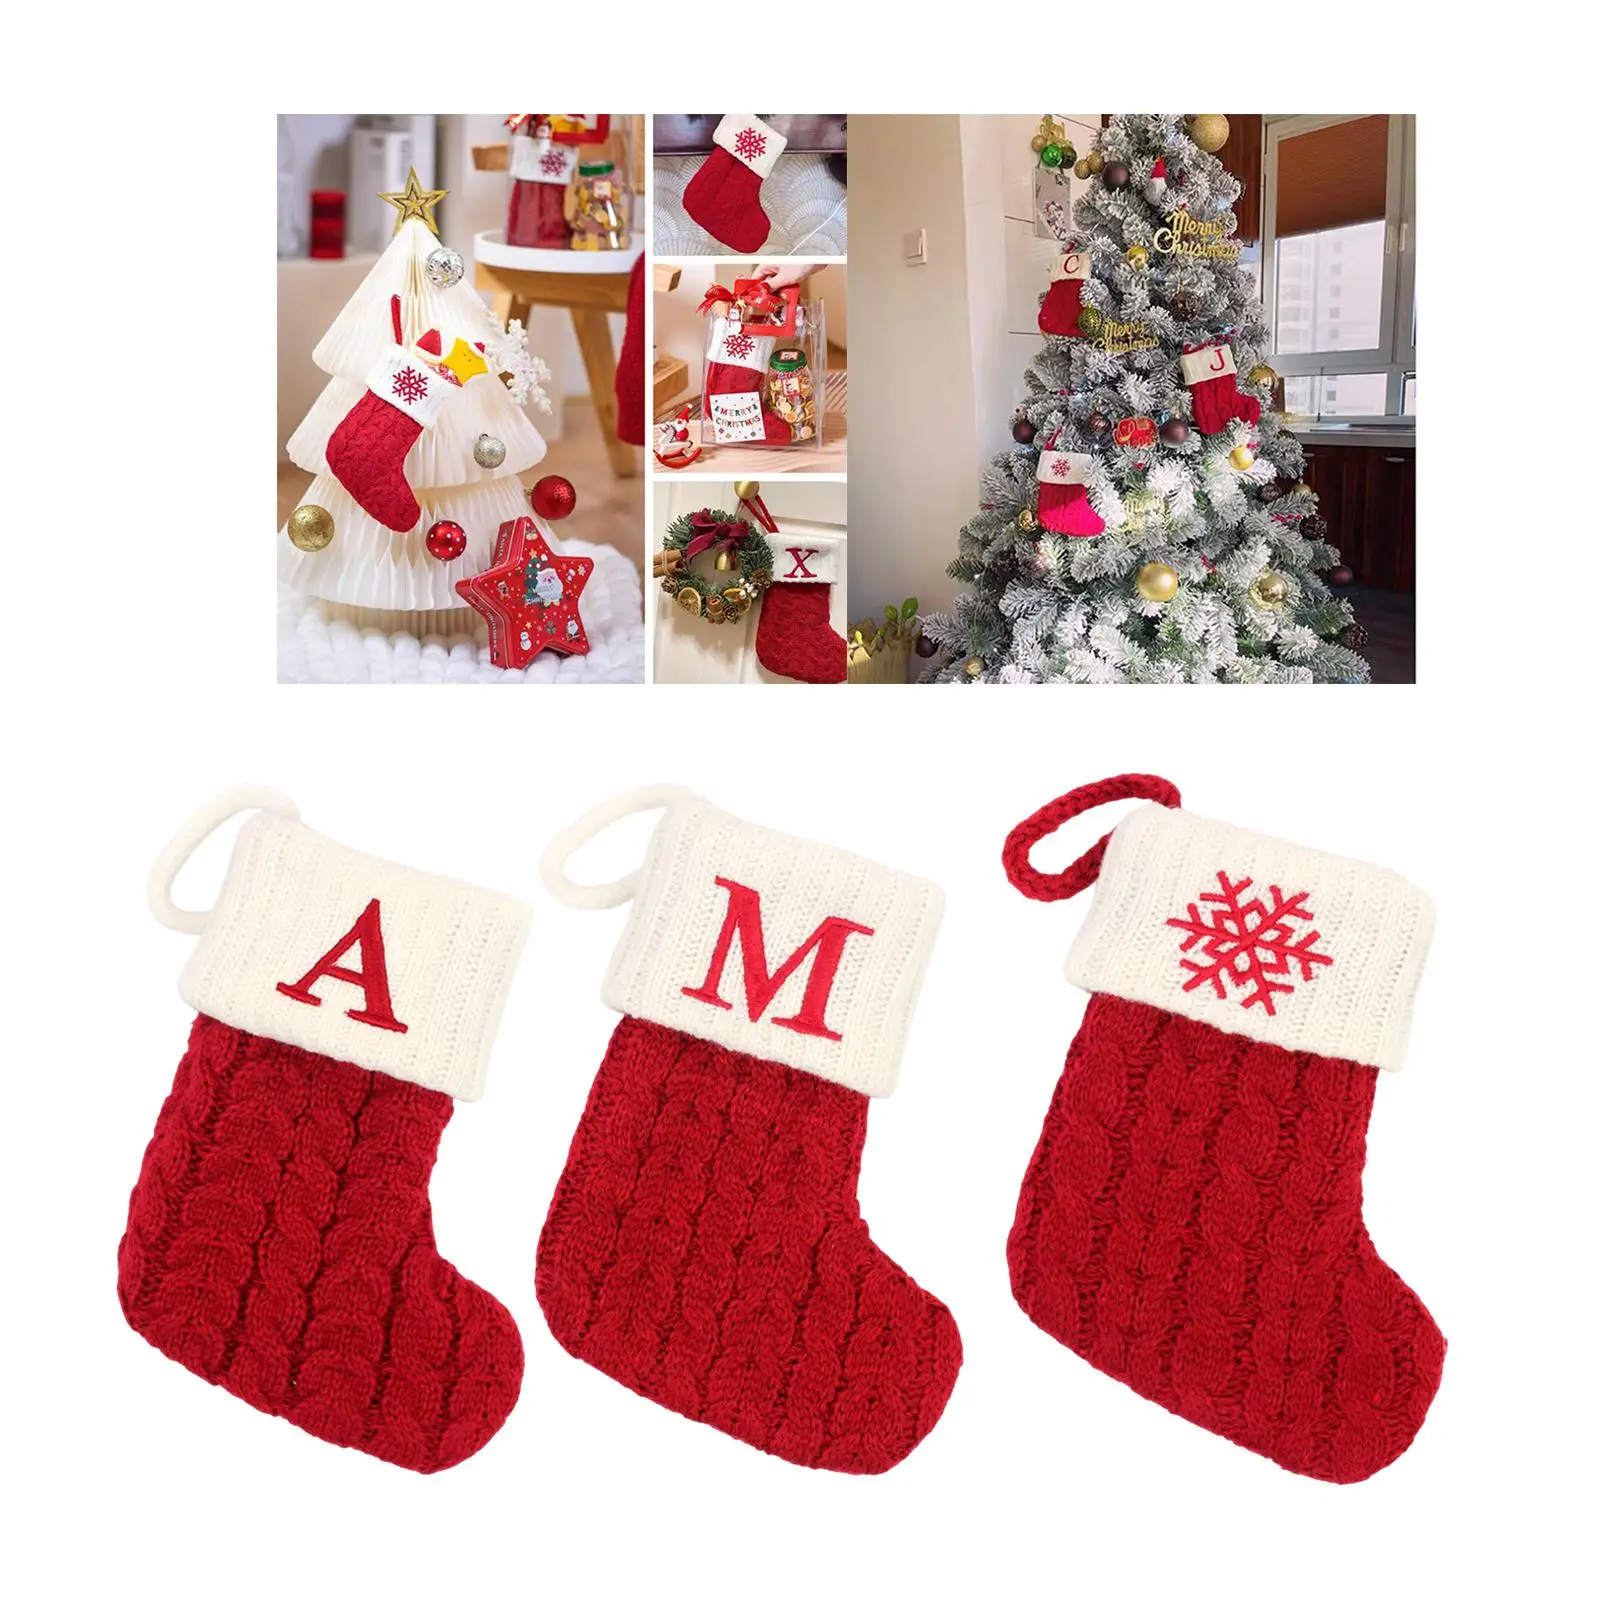 Hanging Knit Christmas Stocking Candy Gift Bag Crochet Cable Knit Christmas Stockings Christmas Socks for Garden Home Ornament